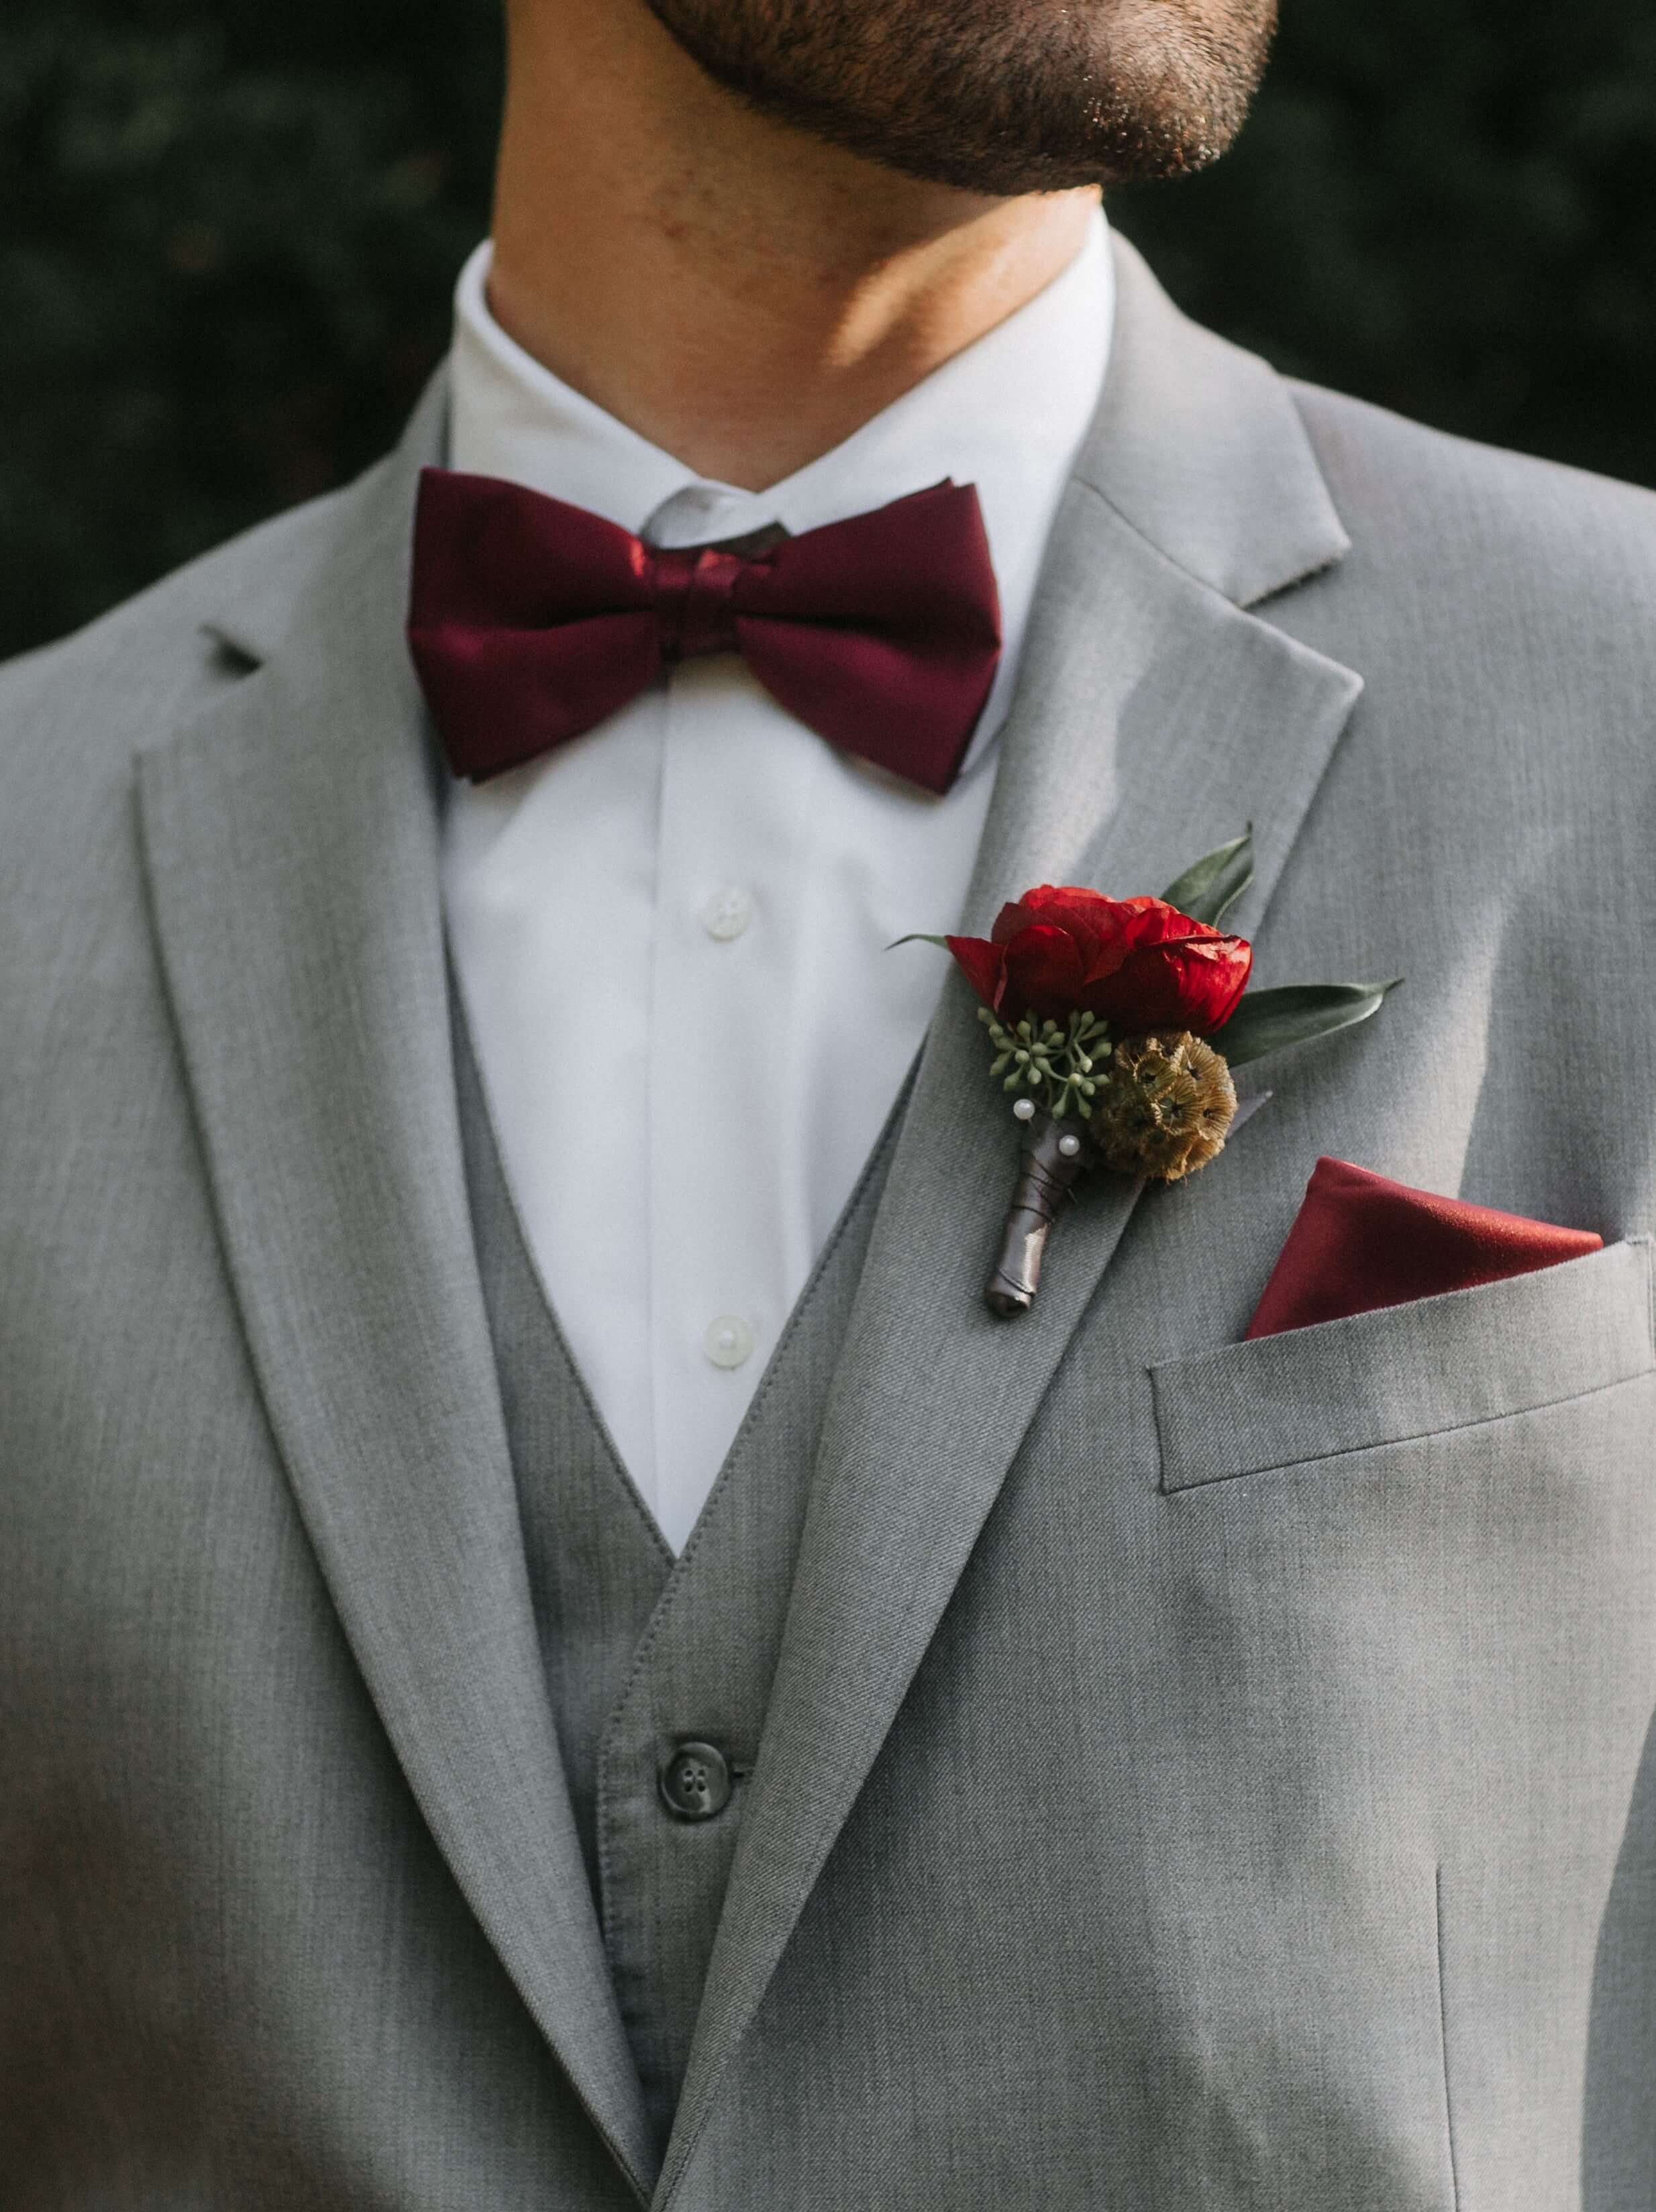 Grey groom suit with burgundy tie for peach and burgundy fall wedding